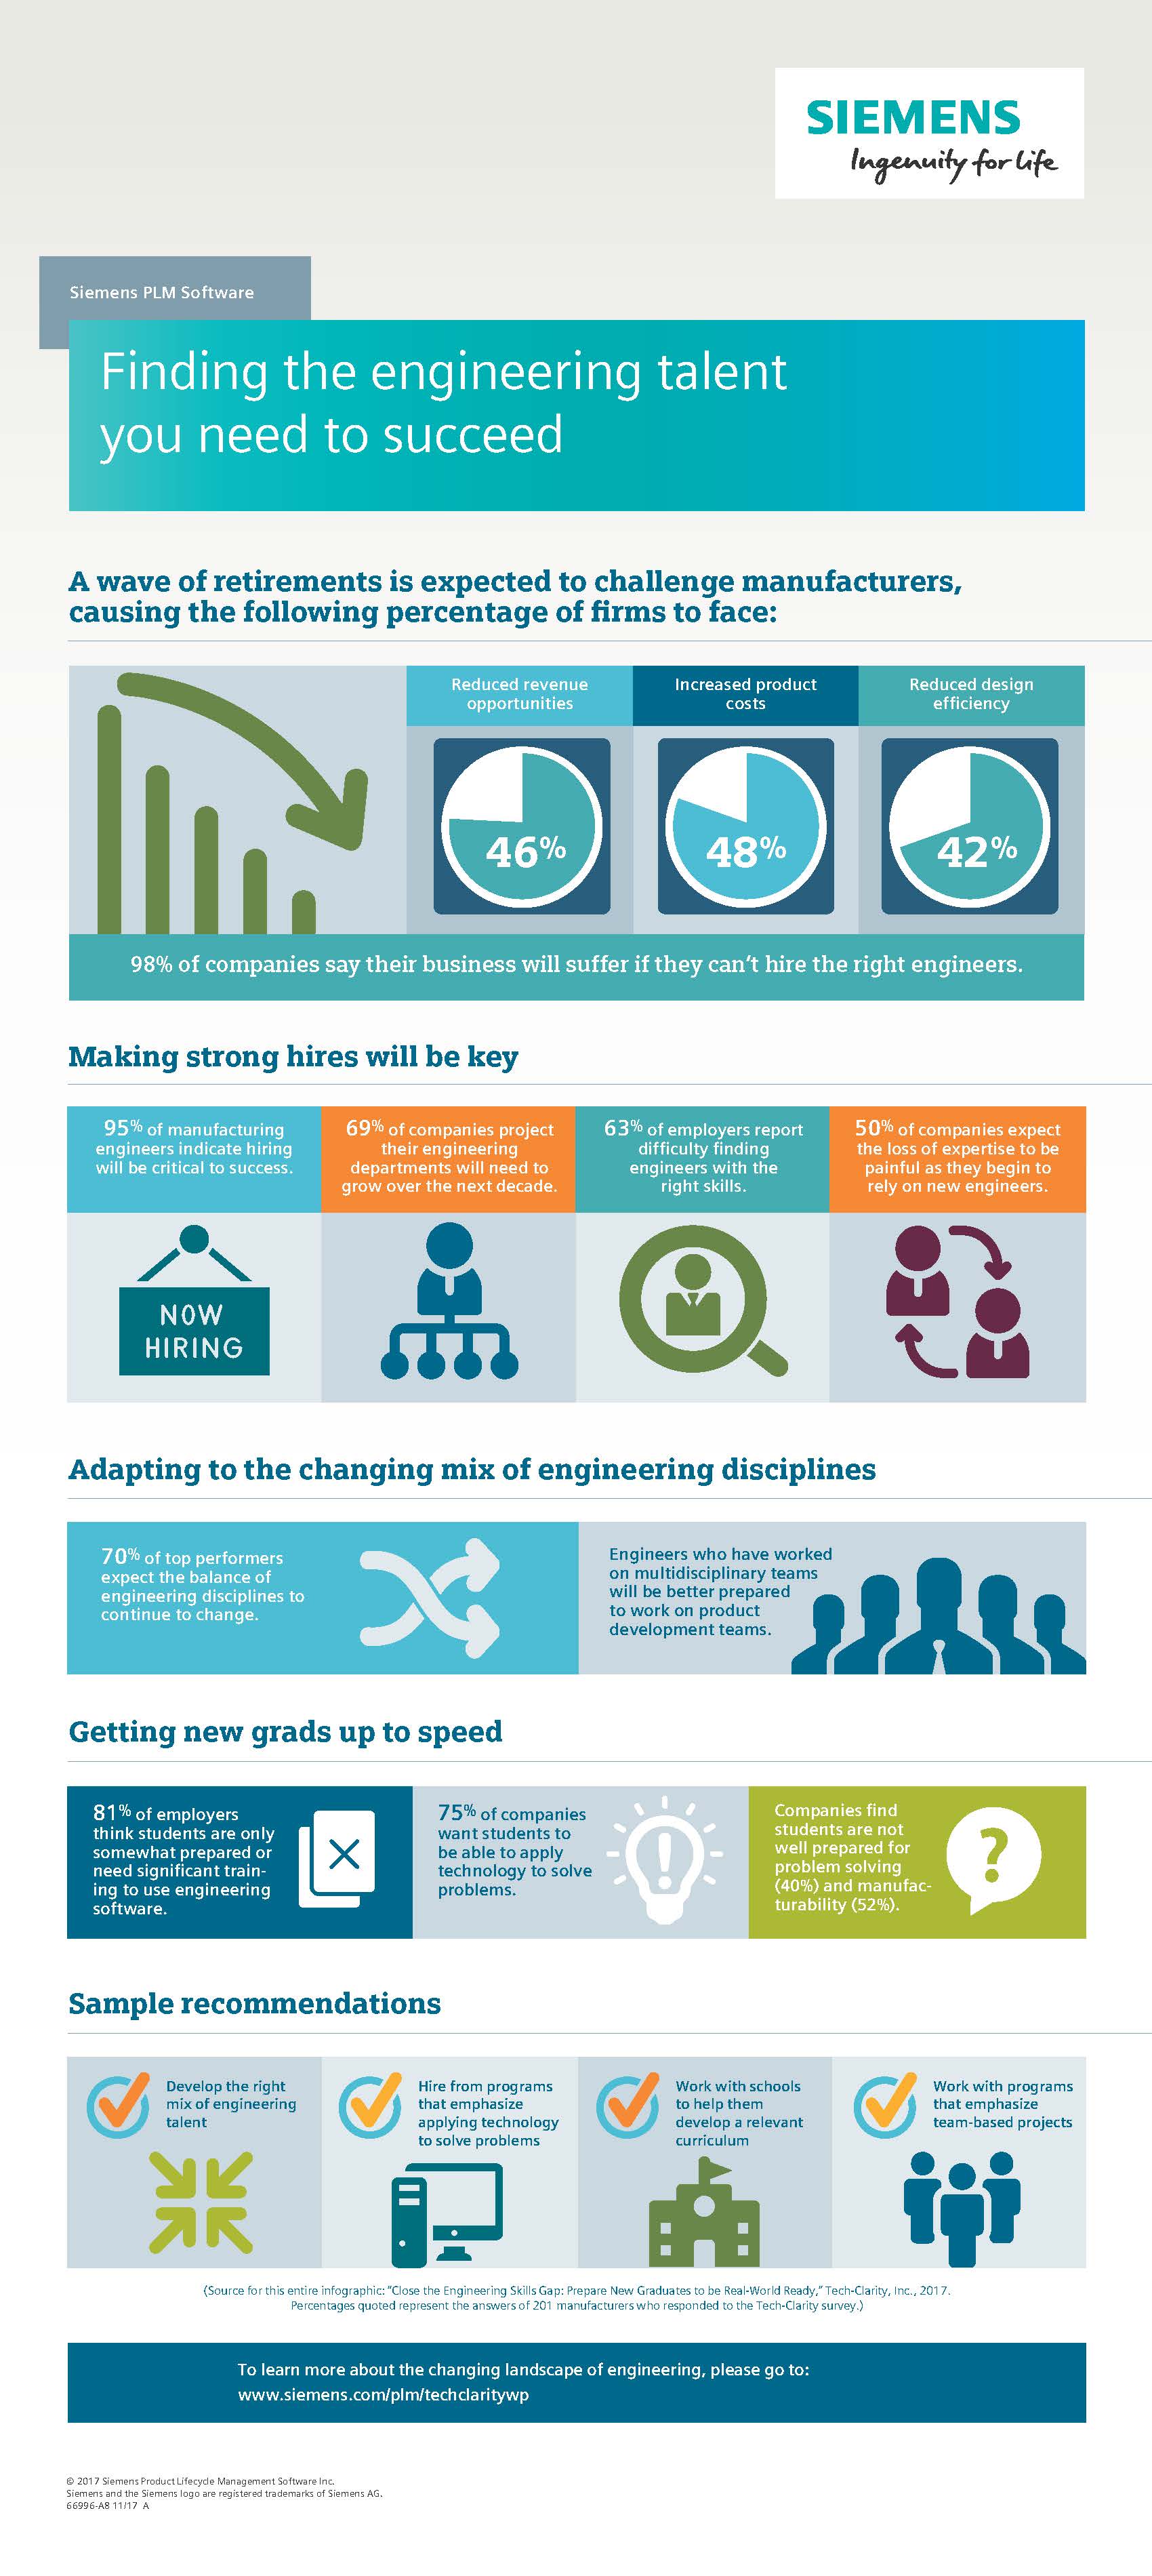 Siemens-PLM-Finding-the-engineering-talent-you-need-to-succeed-infographic-66959_tcm1023-259955.jpg